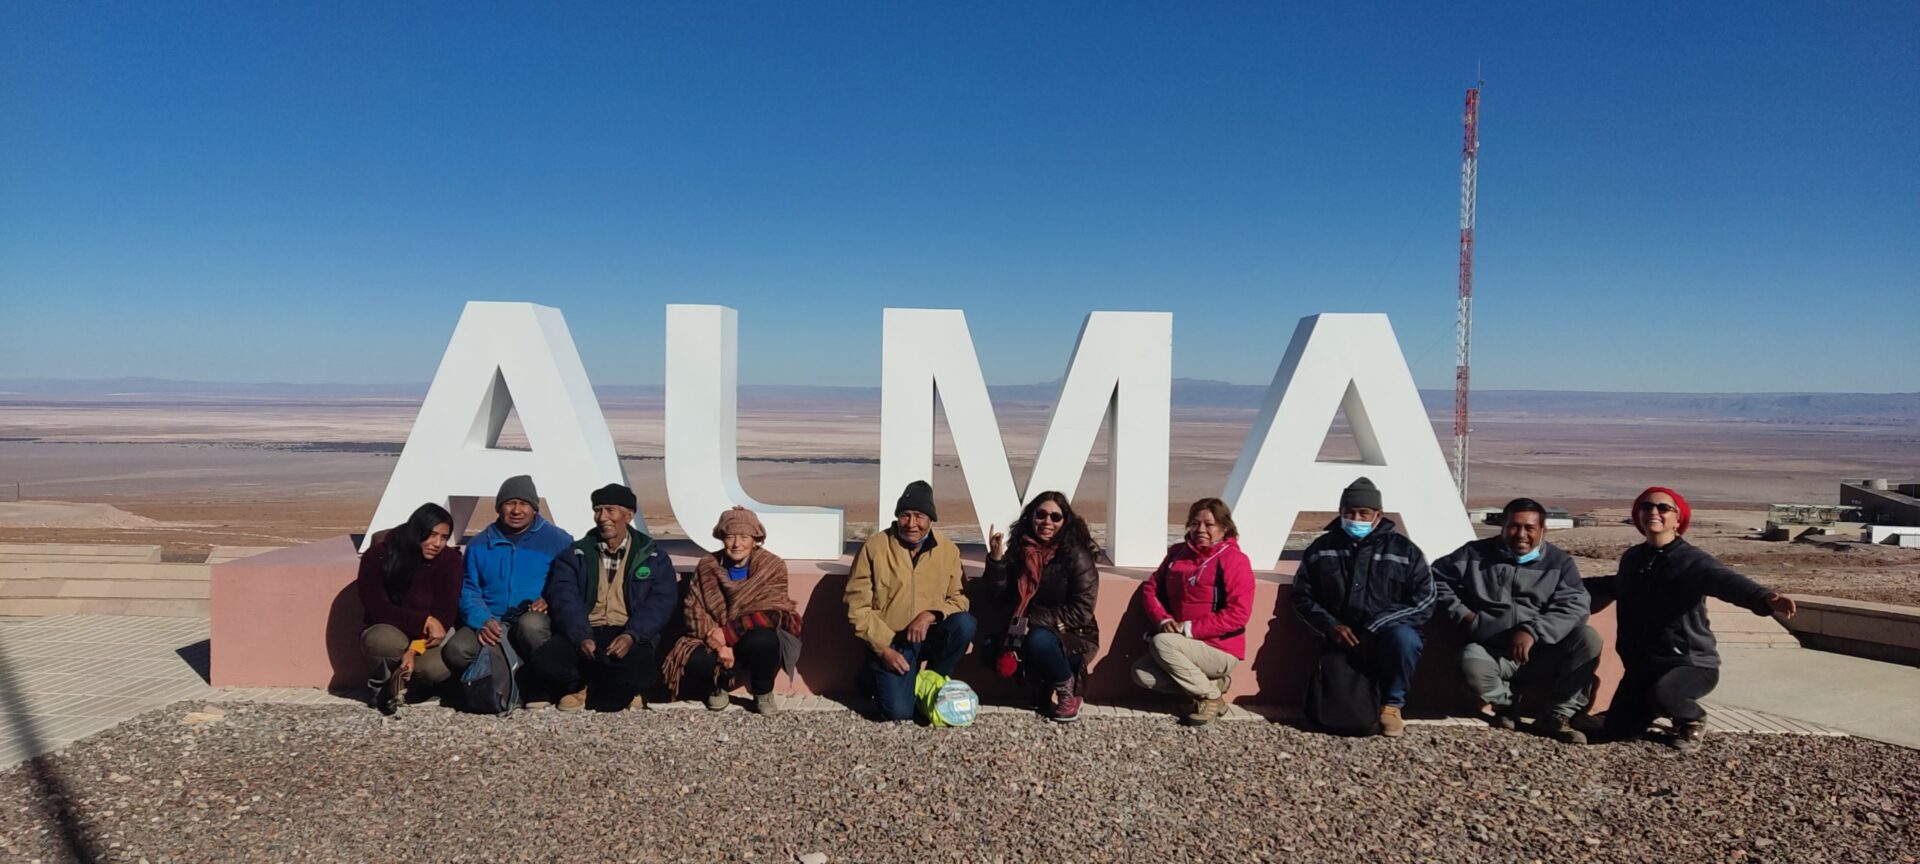 <p>Visit of the Atacama community of Coyo to the ALMA water treatment plant in search of prototypes for their puri, water, in order to grow it into fodder for their animals and replicate good examples.<br />
Credit: ALMA (ESO/NAOJ/NRAO)</p>
